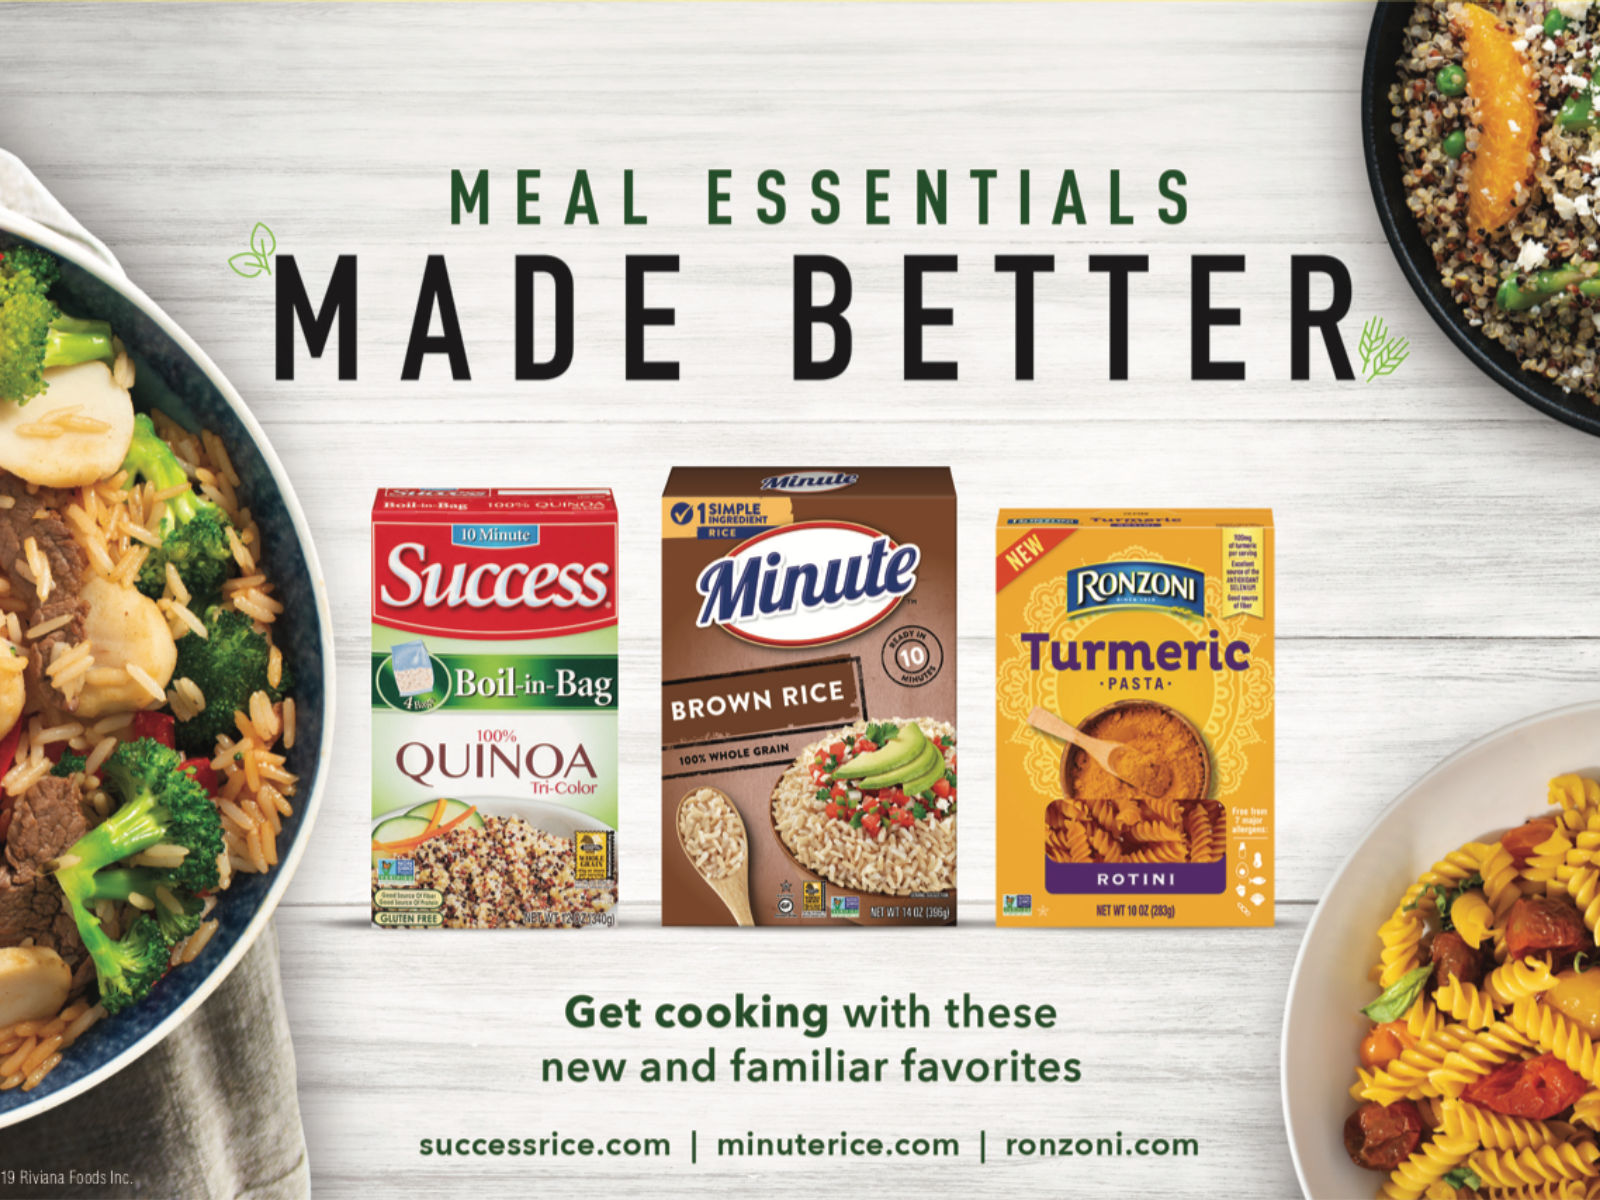 Save Up To $6 On Ronzoni, Minute, Success and Mahatma Rice Products At Publix